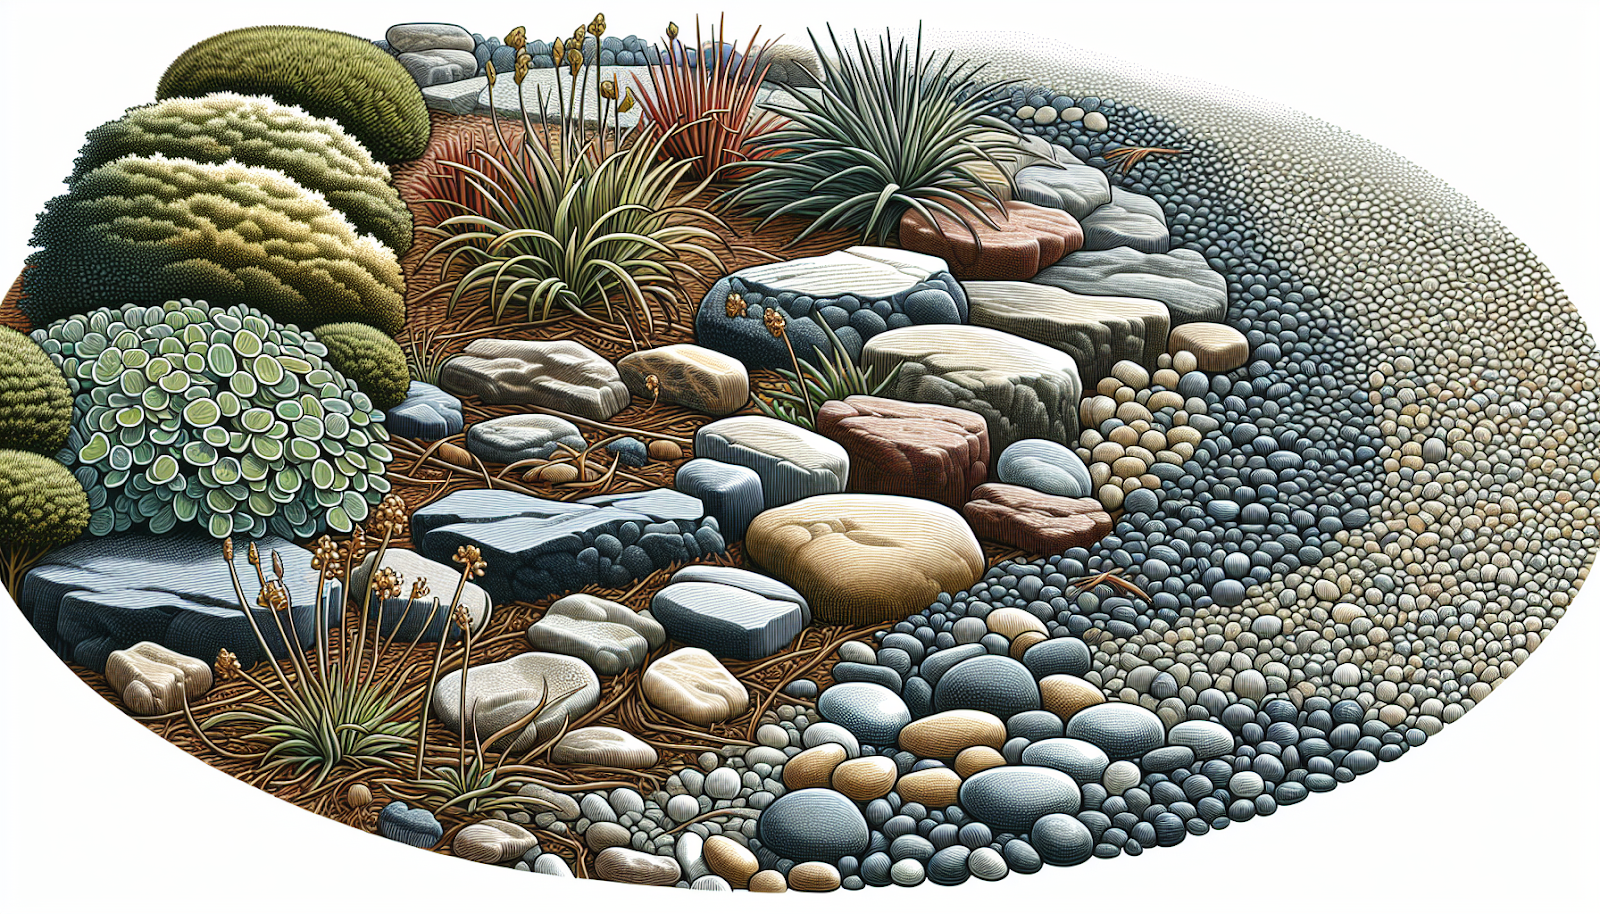 Illustration of stone and gravel mulch in a garden